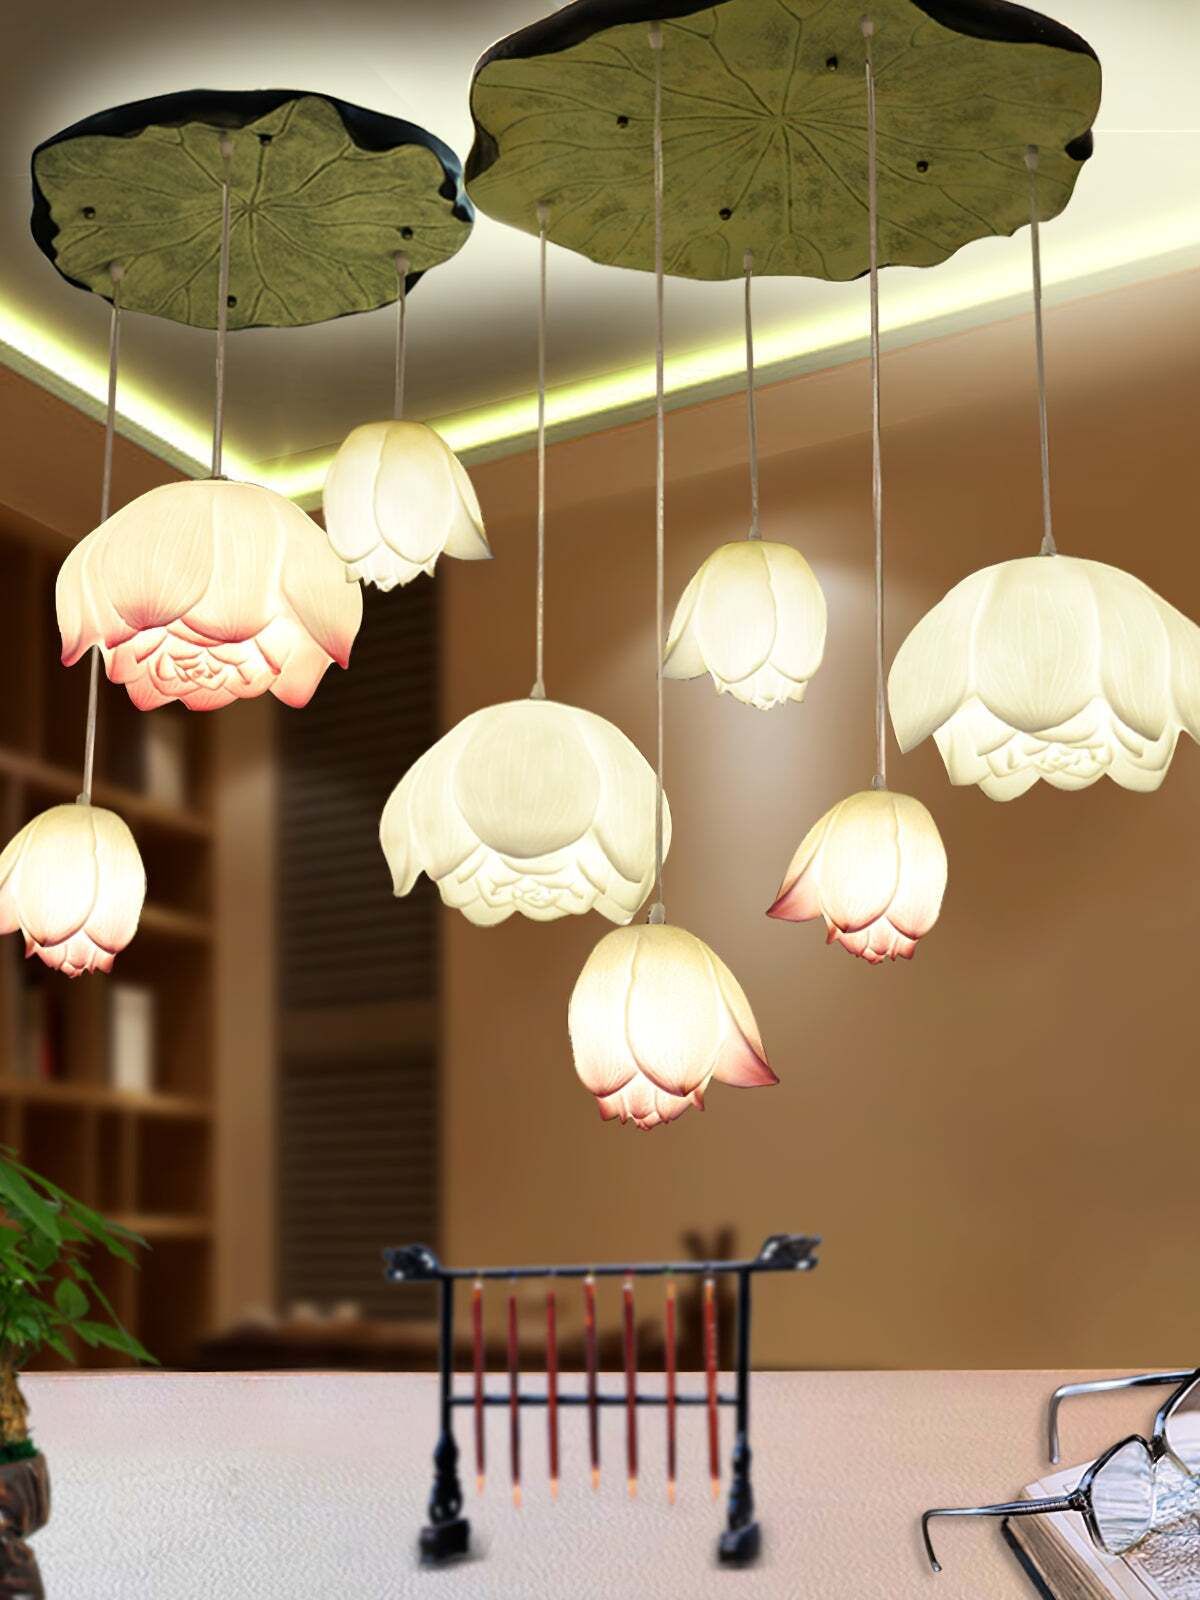 Chandeliers With Shades : Beautiful Chandeliers with Elegant Shades for Your Home Decor